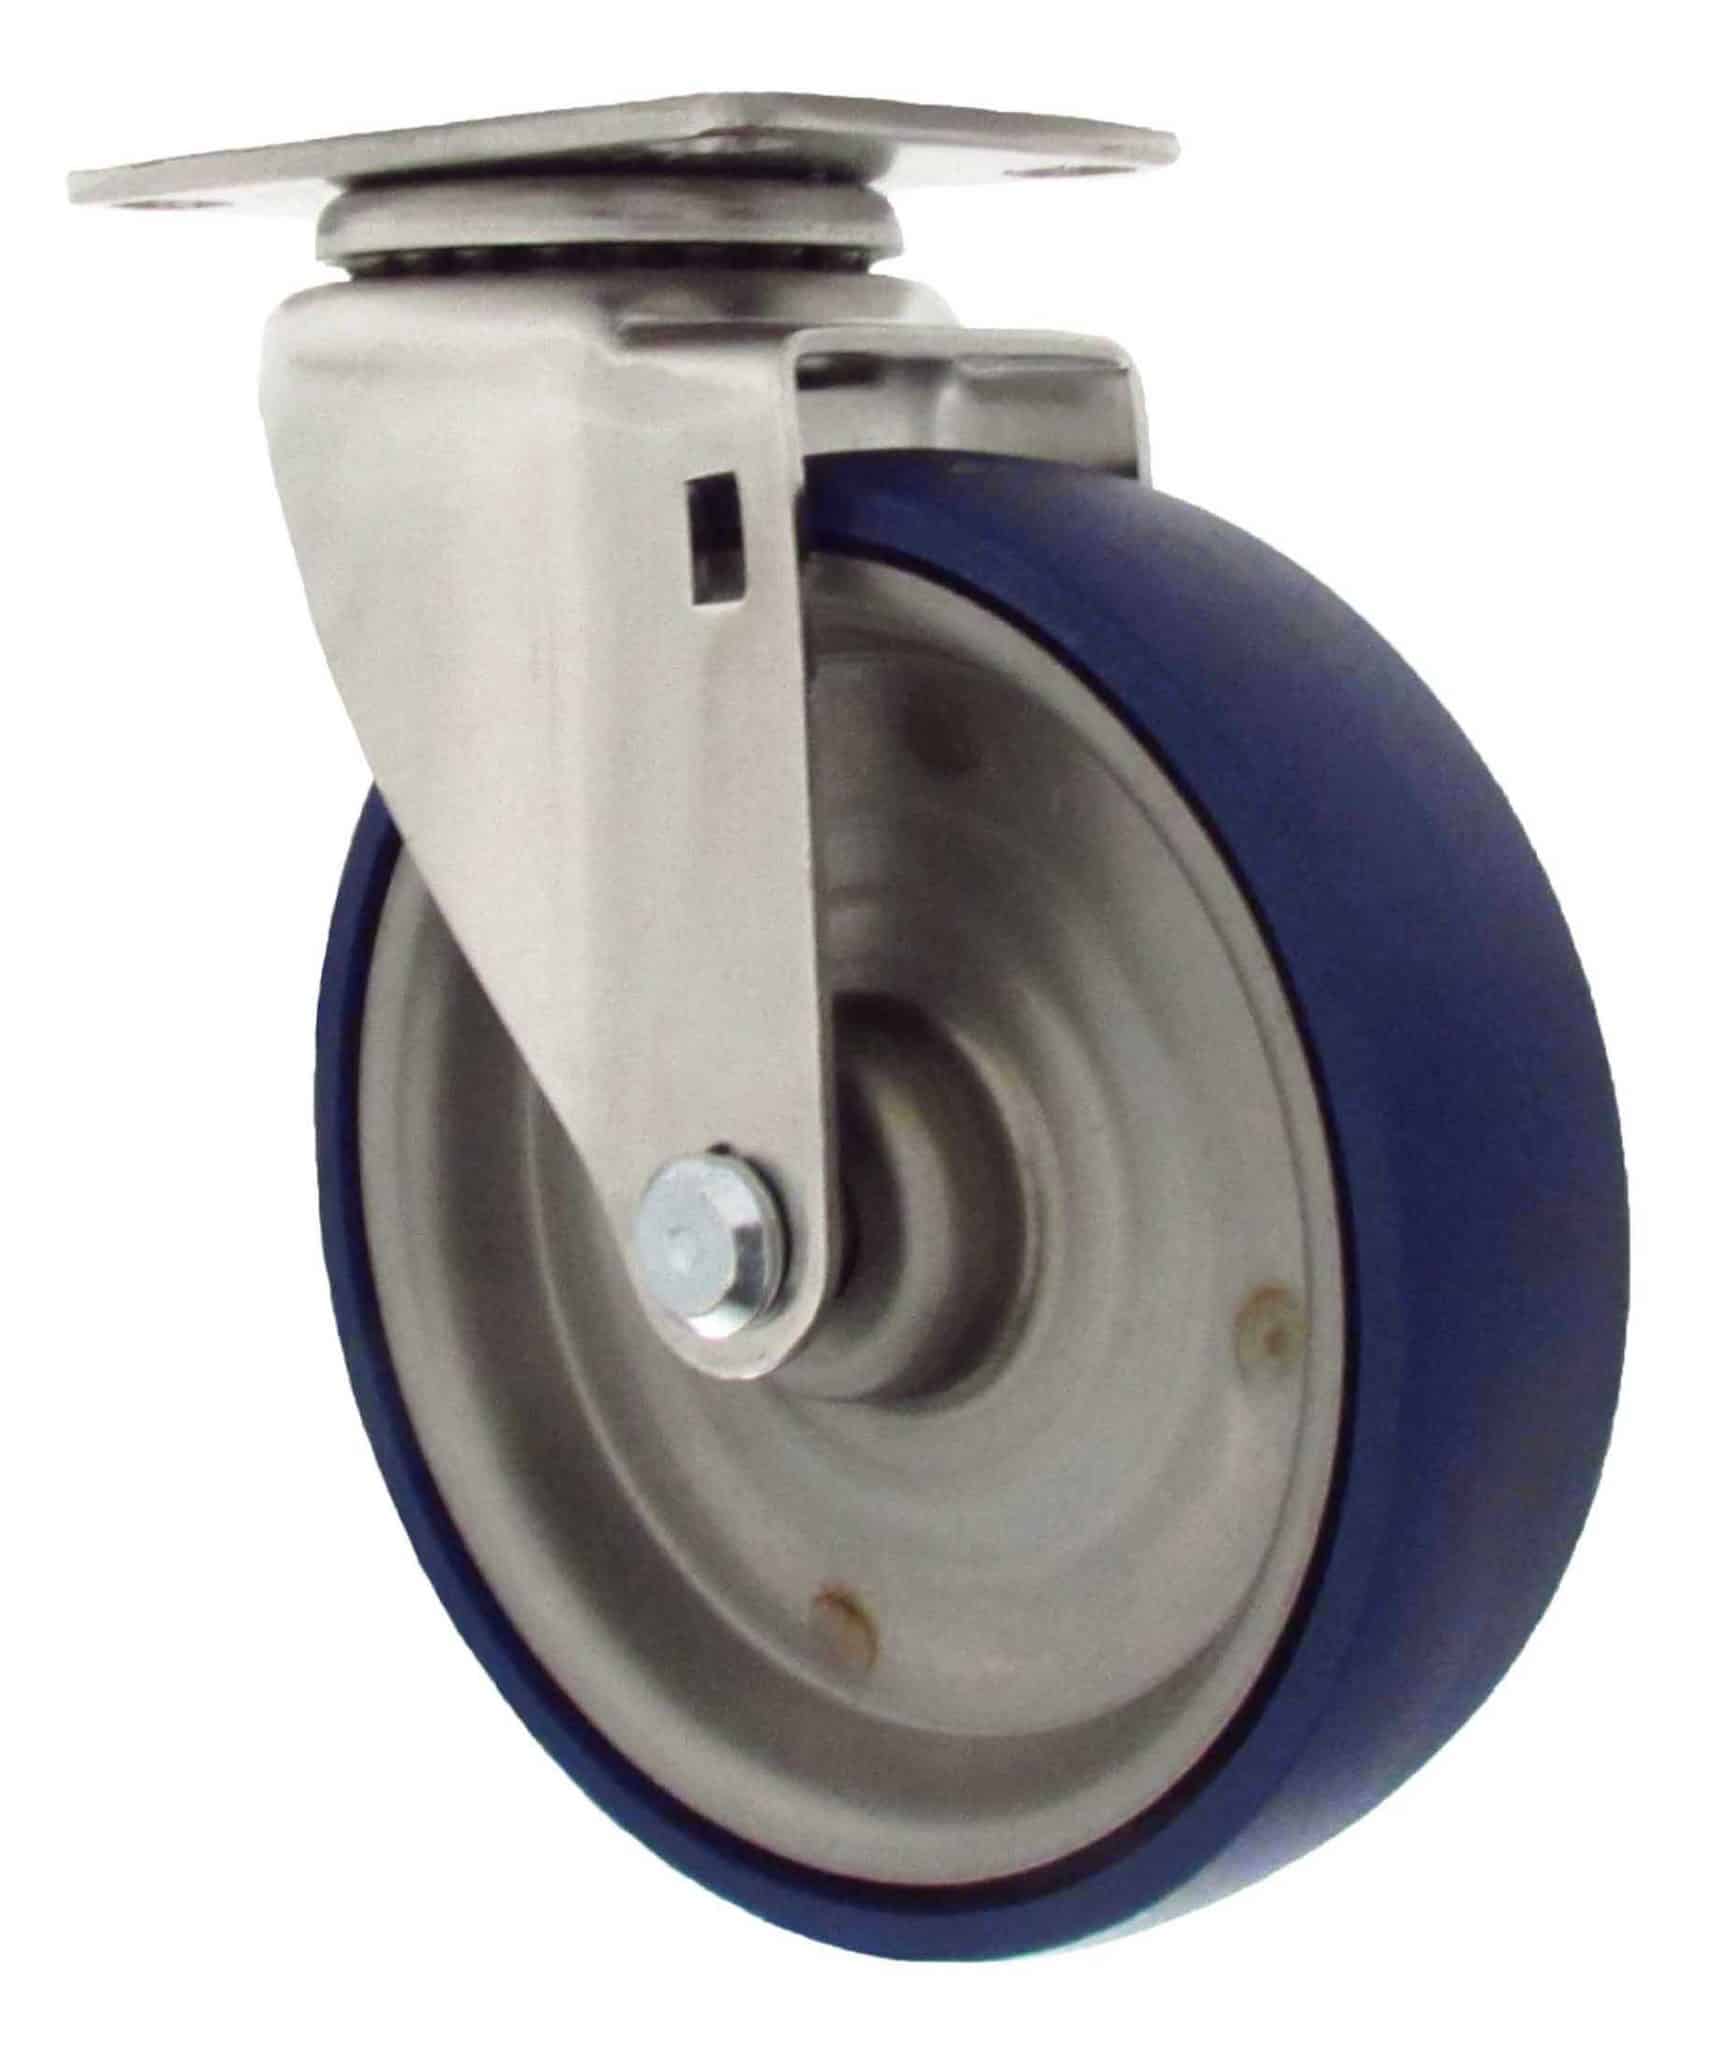 4DLSSSSB 4" Swivel Caster Stainless Steel Solid Poly Wheel with Top Lock Brake 